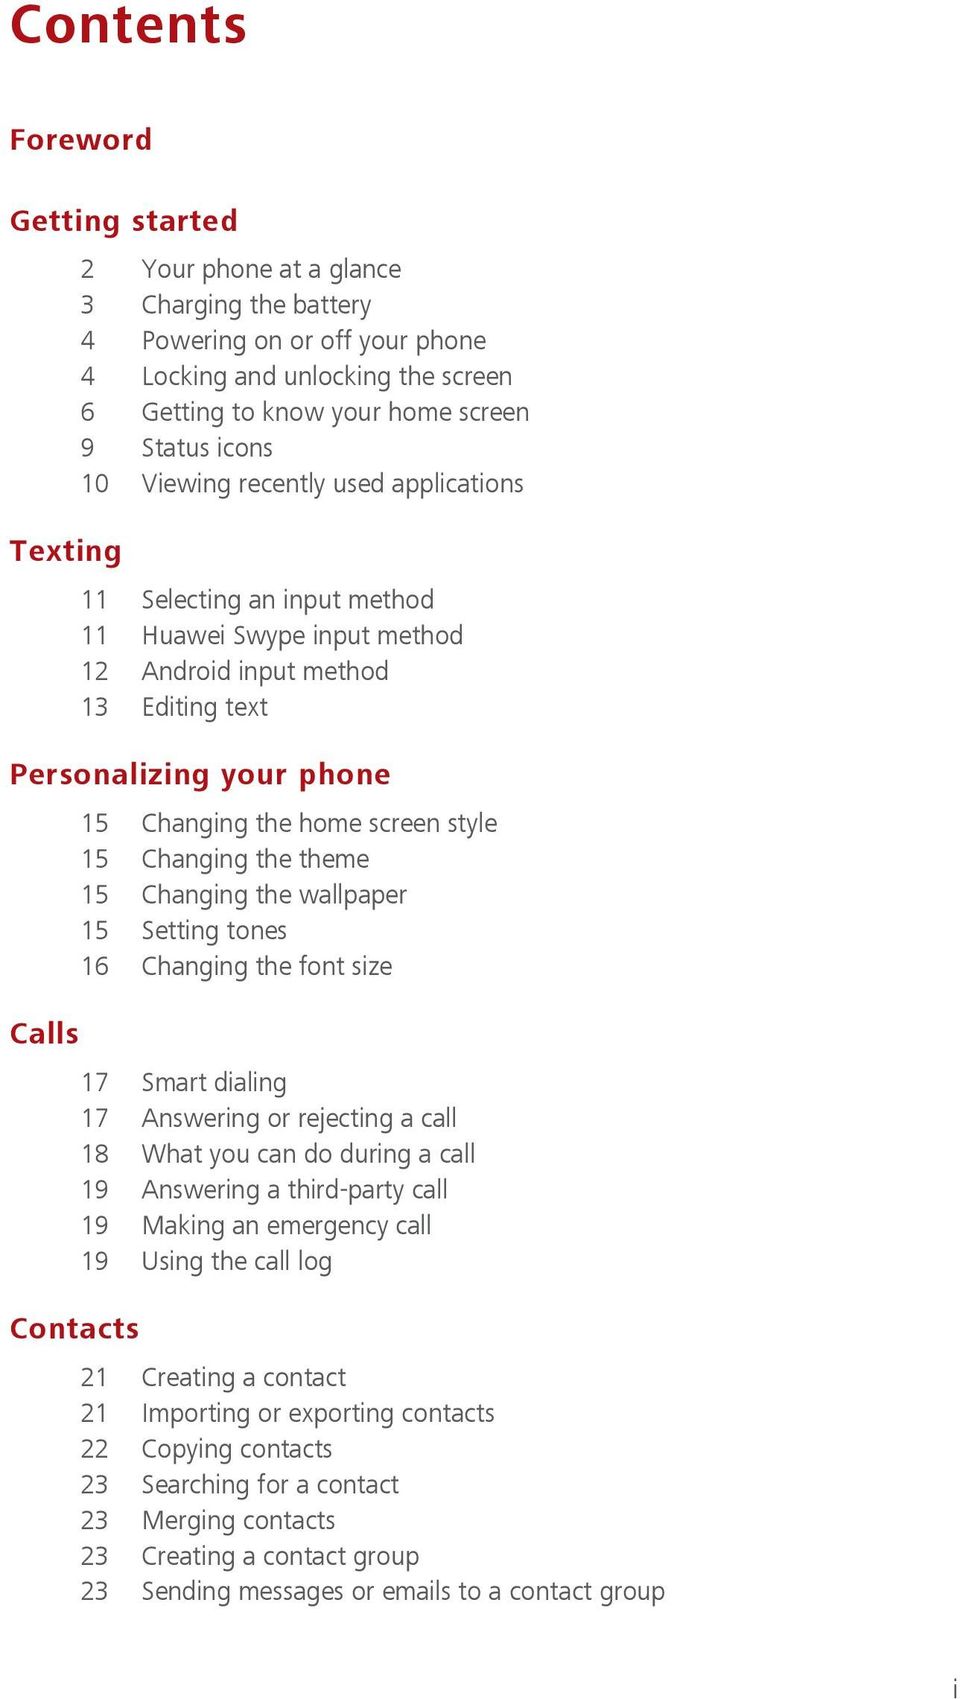 style 15 Changing the theme 15 Changing the wallpaper 15 Setting tones 16 Changing the font size Calls 17 Smart dialing 17 Answering or rejecting a call 18 What you can do during a call 19 Answering